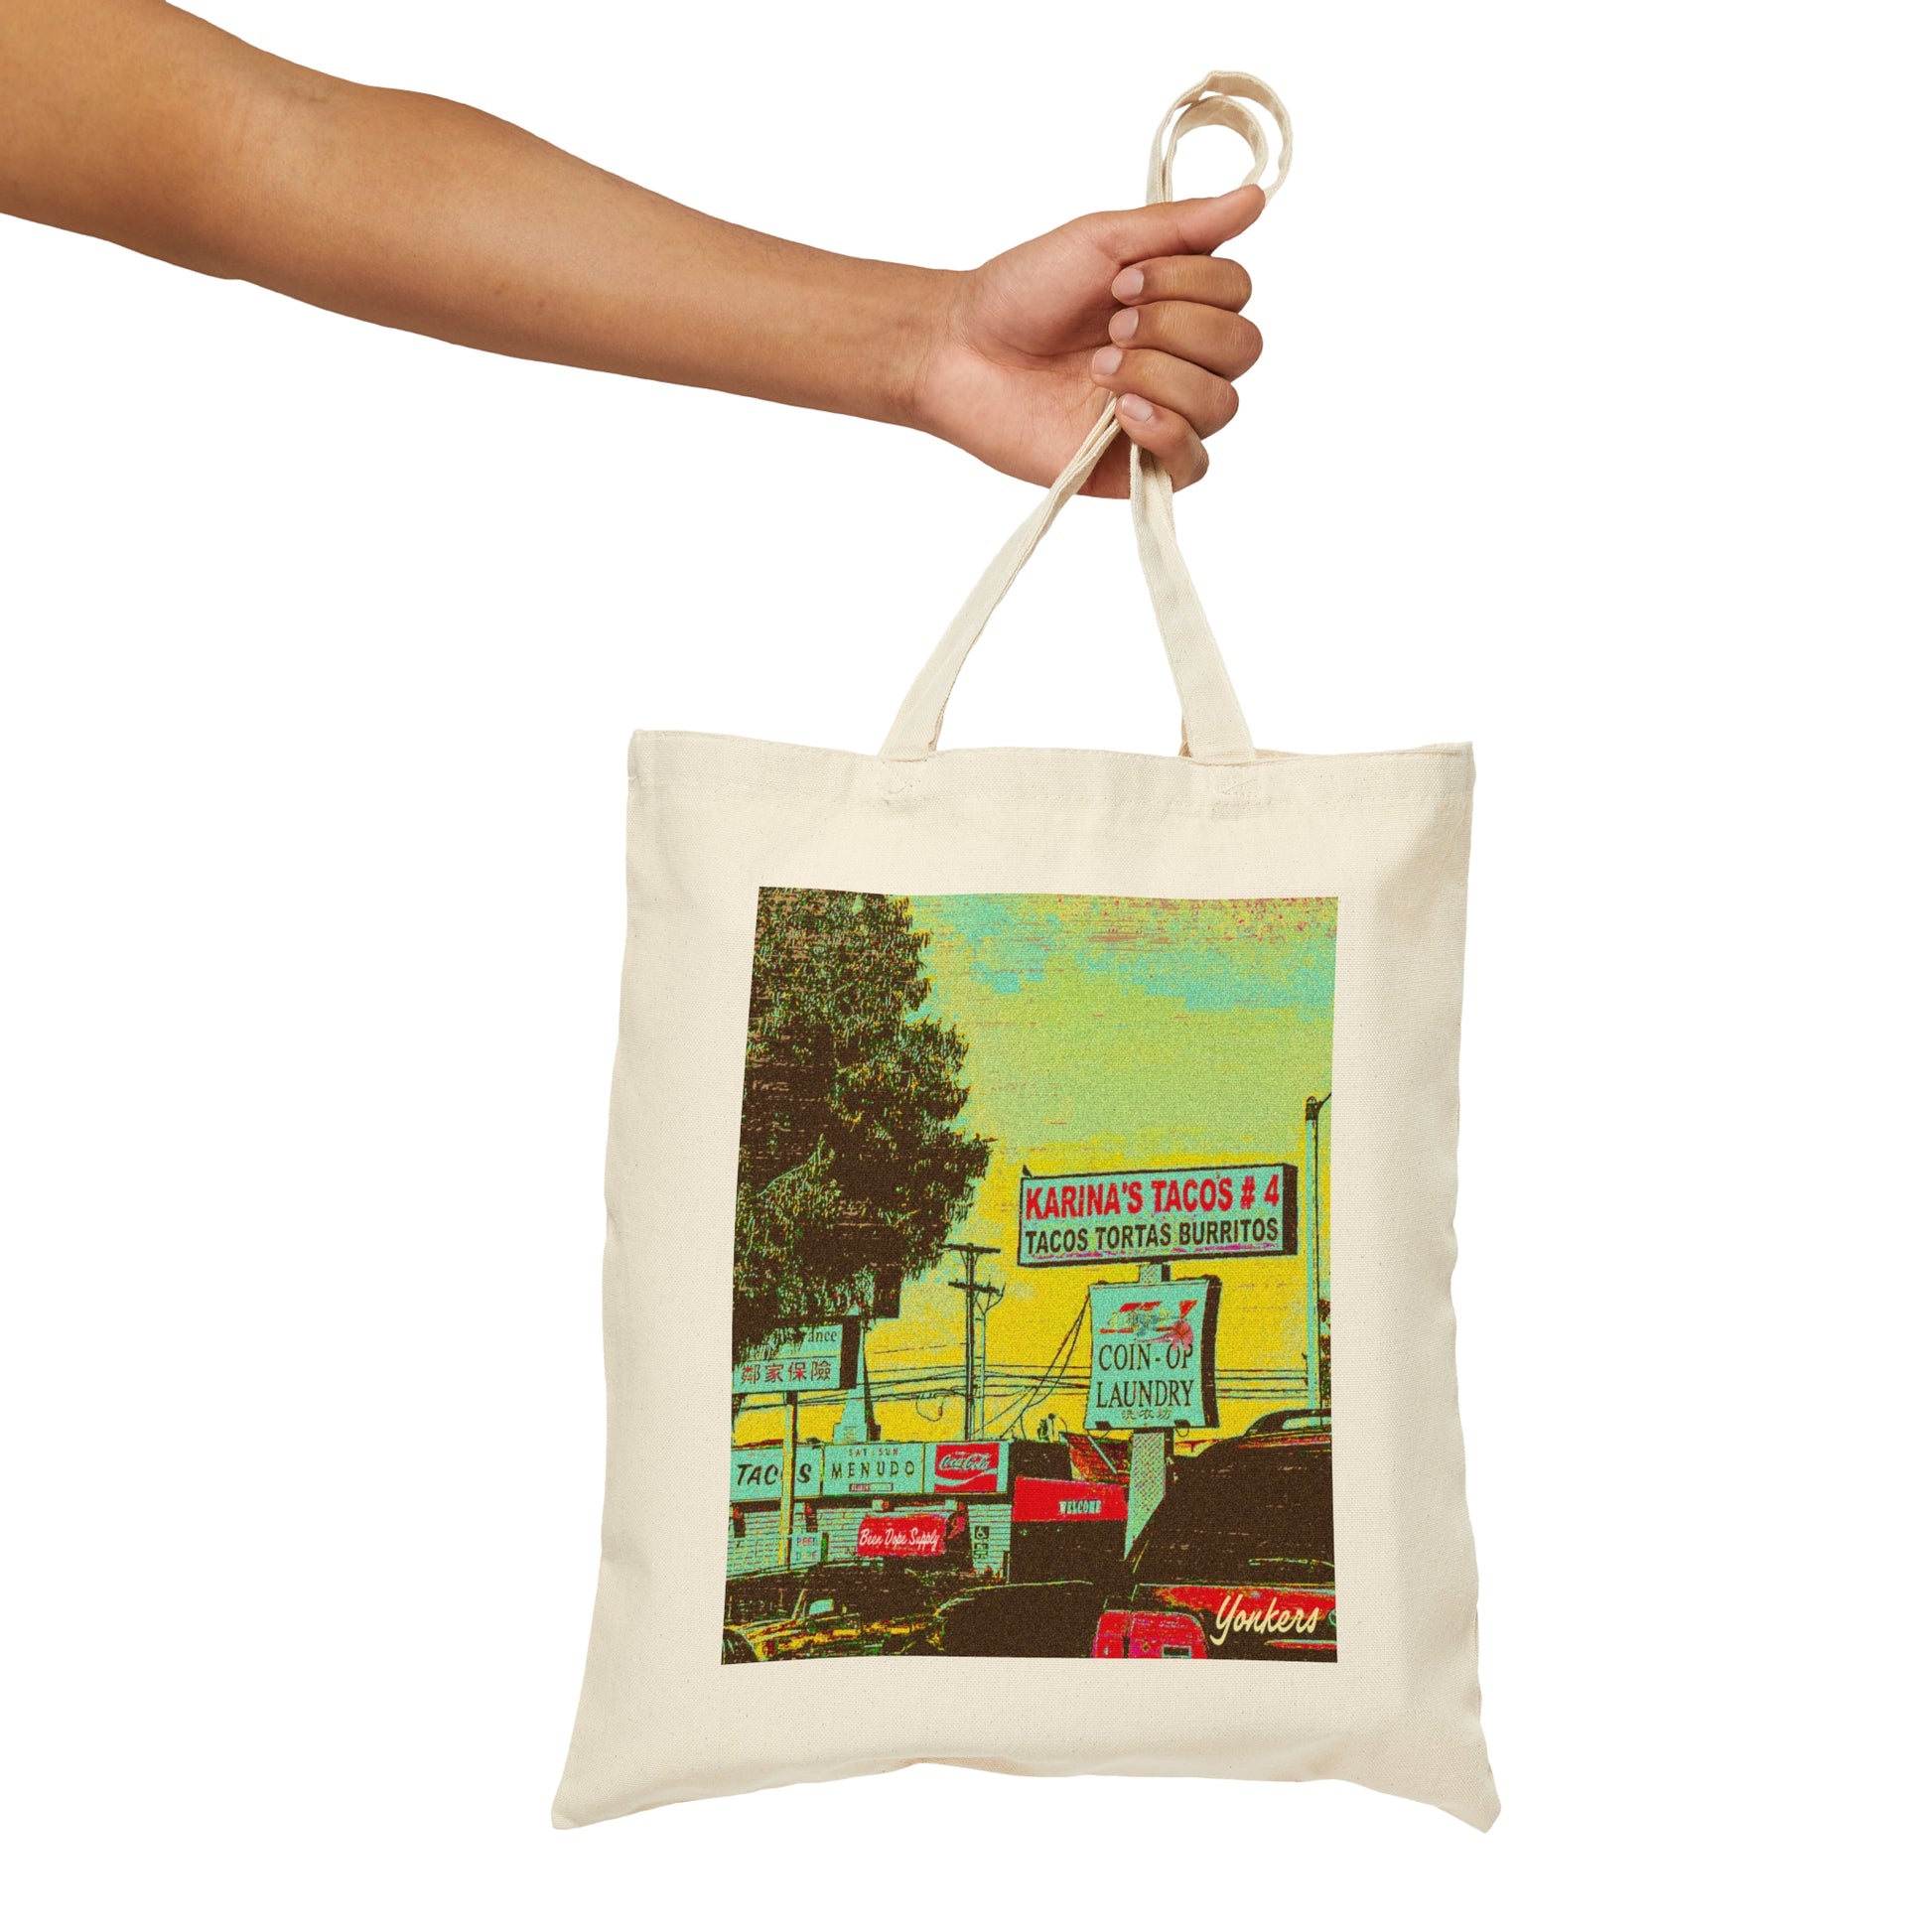 Shorty From Yonkers - 100% Cotton Canvas Tote Bag - 15" x 16" - Been Dope Supply